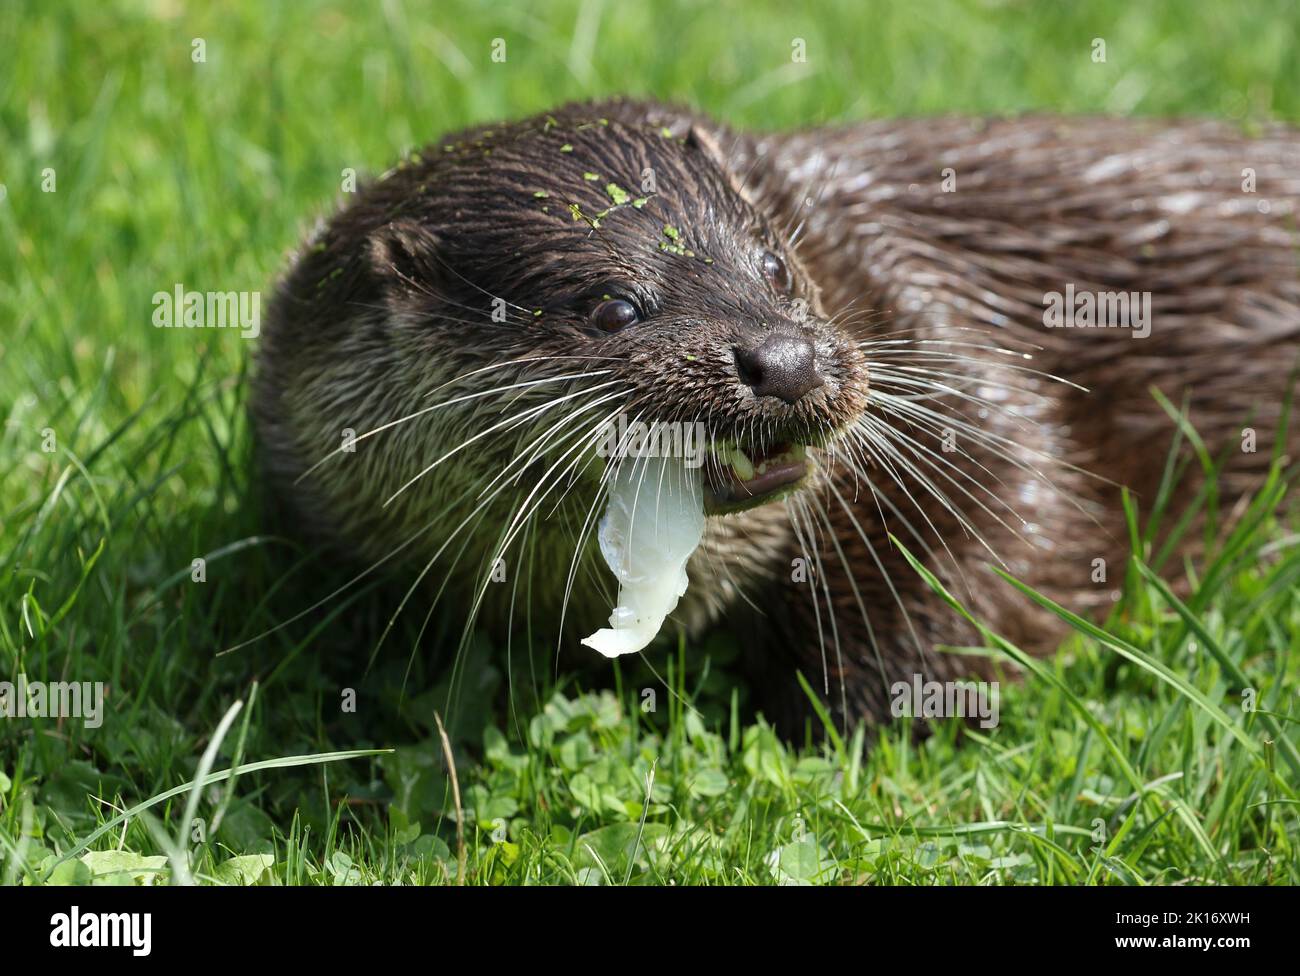 A head shot of a European Otter, Lutra lutra, on the bank of a lake at a wildlife conservation center. Stock Photo